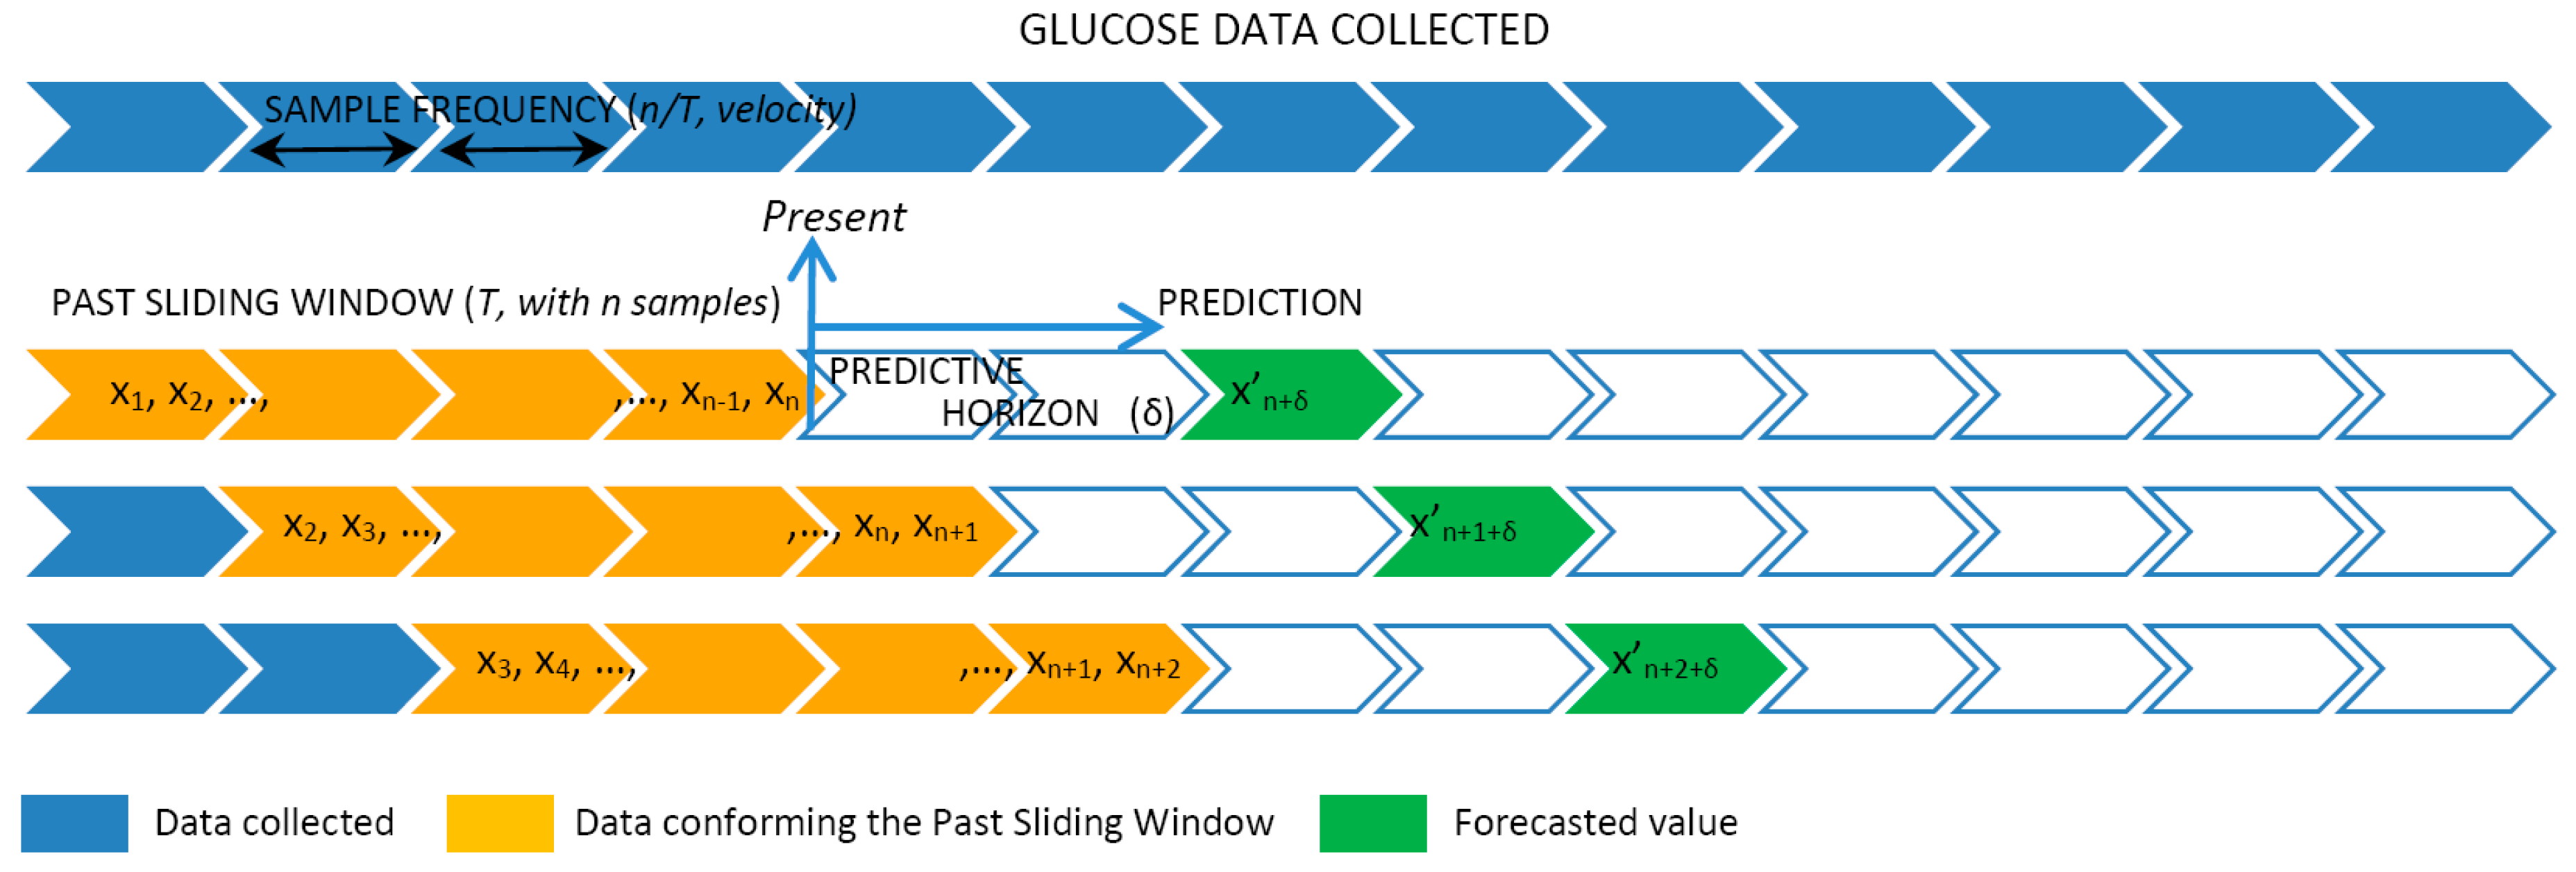 Sensors | Free Full-Text | Utility of Big Data in Predicting Short-Term  Blood Glucose Levels in Type 1 Diabetes Mellitus Through Machine Learning  Techniques